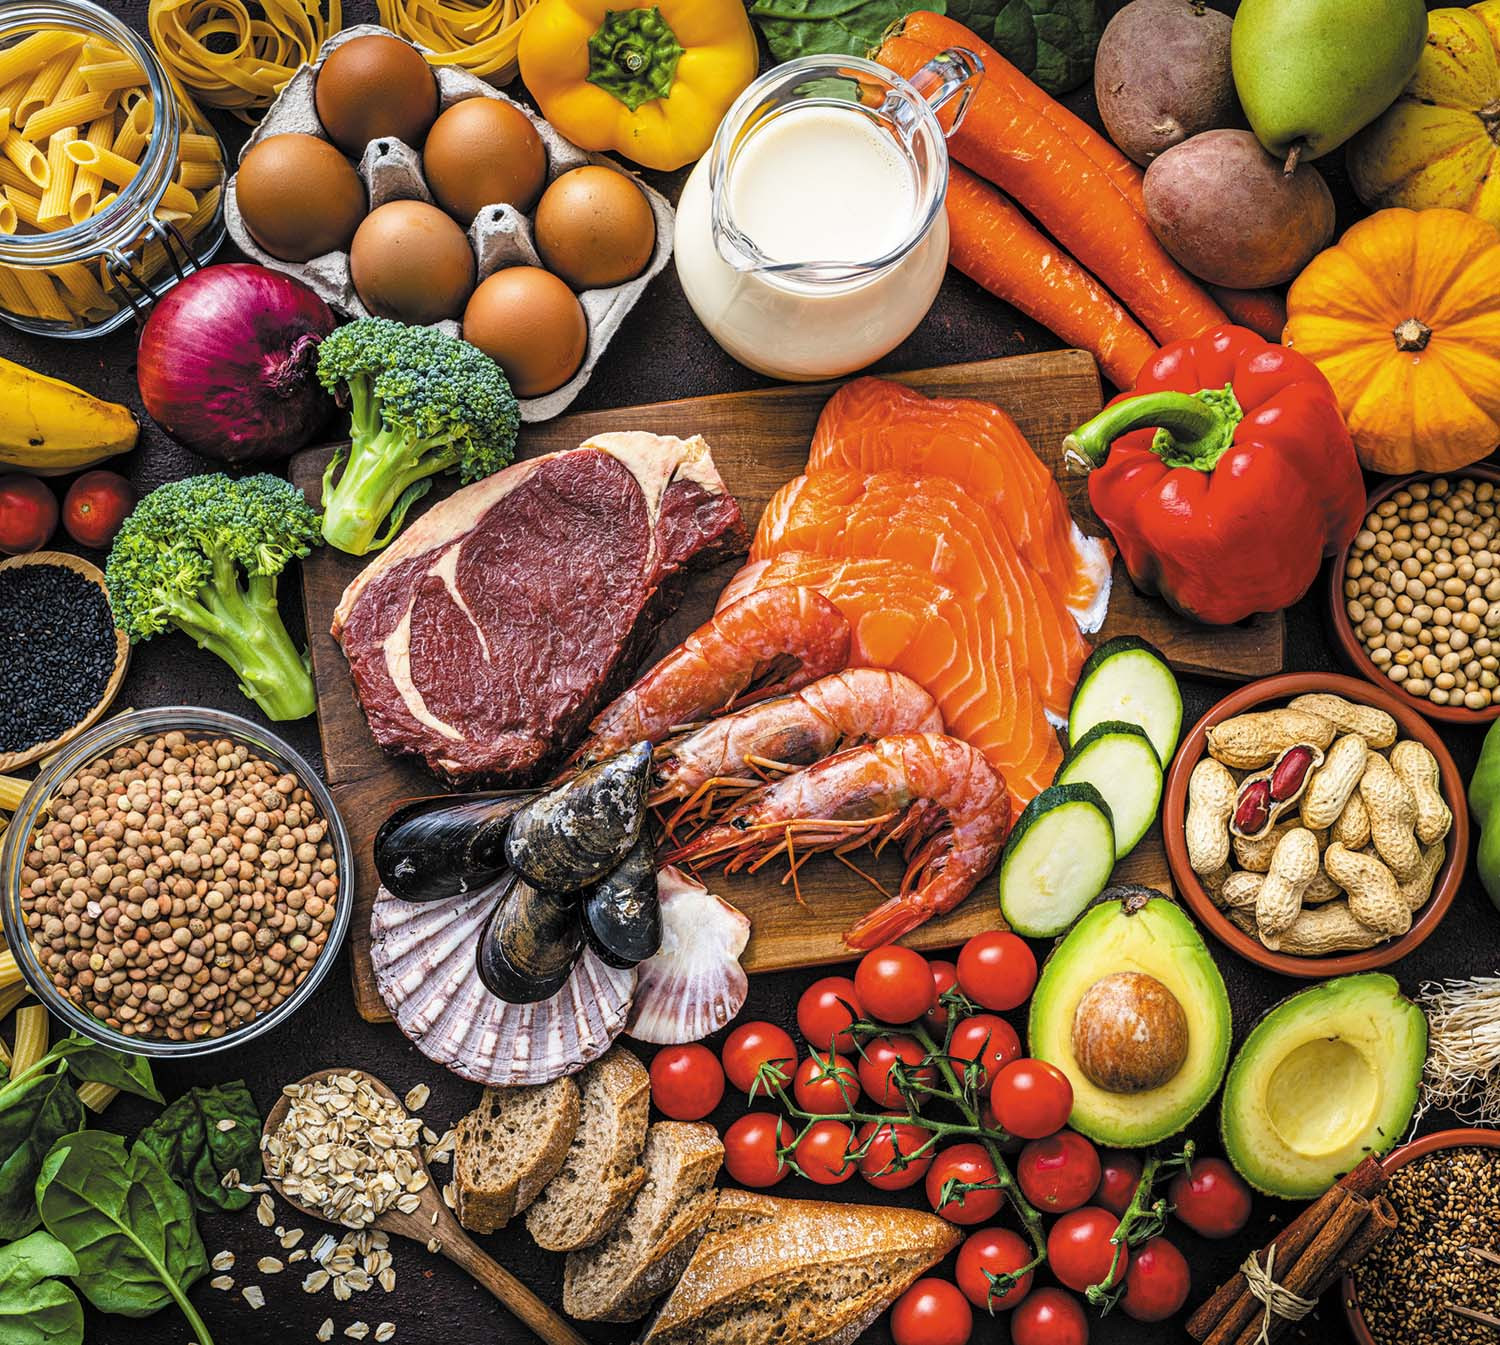 photo of an assortment of foods that are part of a healthy diet: fish, meat, vegetables, eggs, nuts